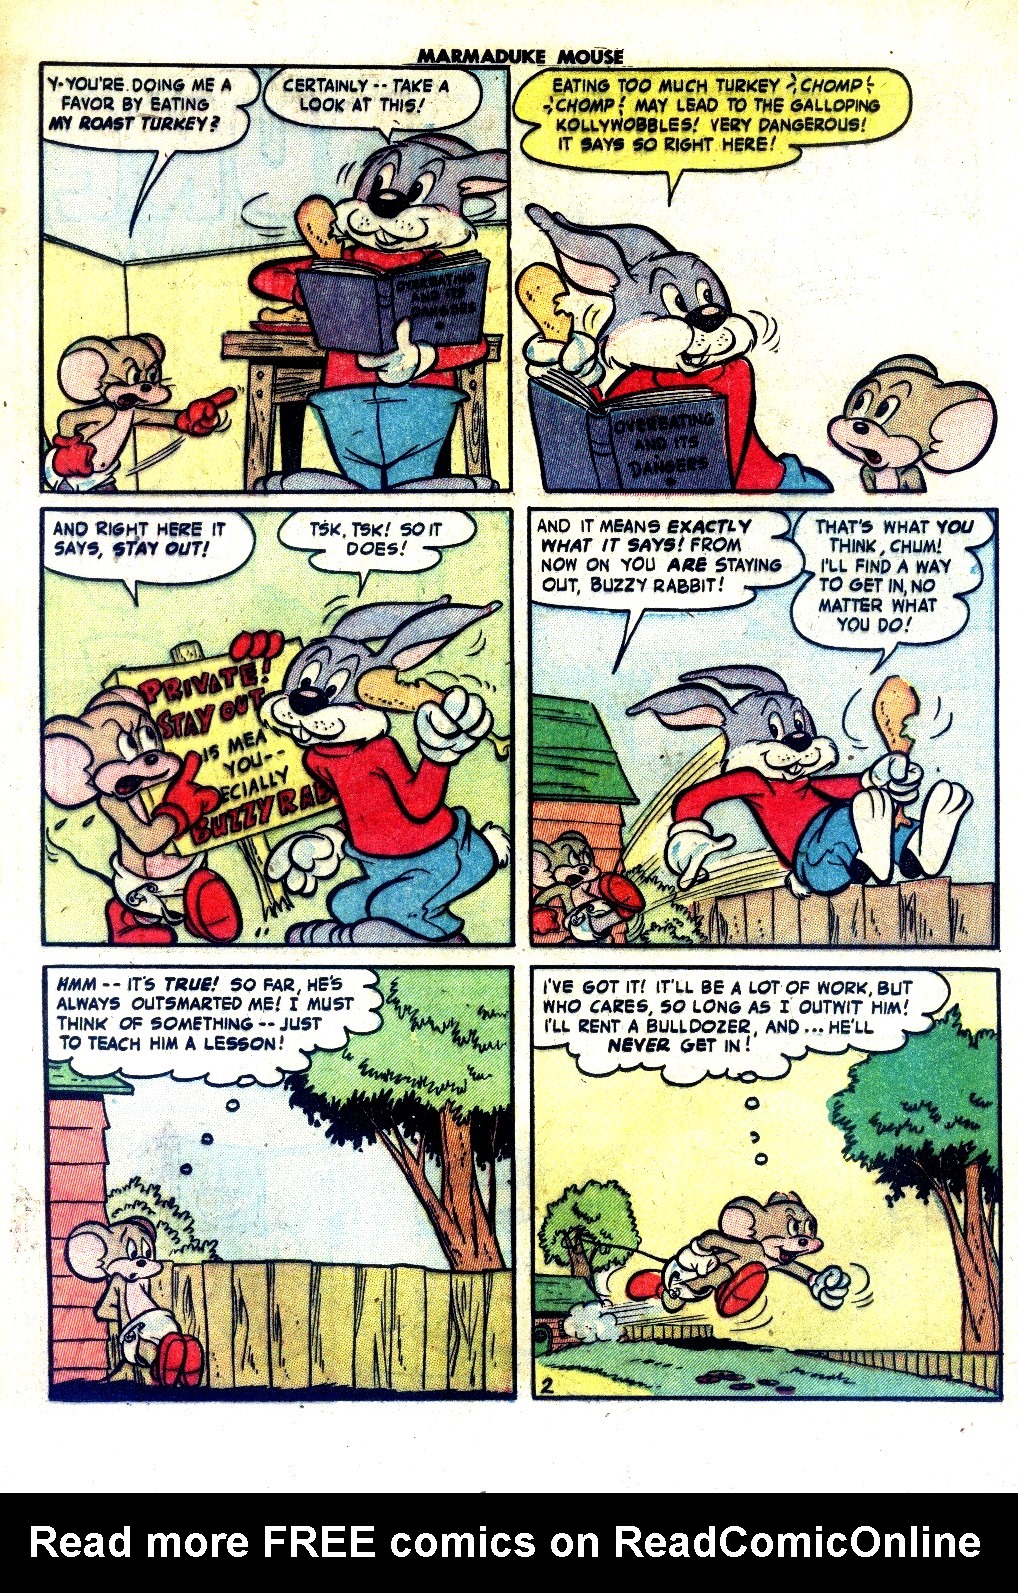 Read online Marmaduke Mouse comic -  Issue #40 - 20